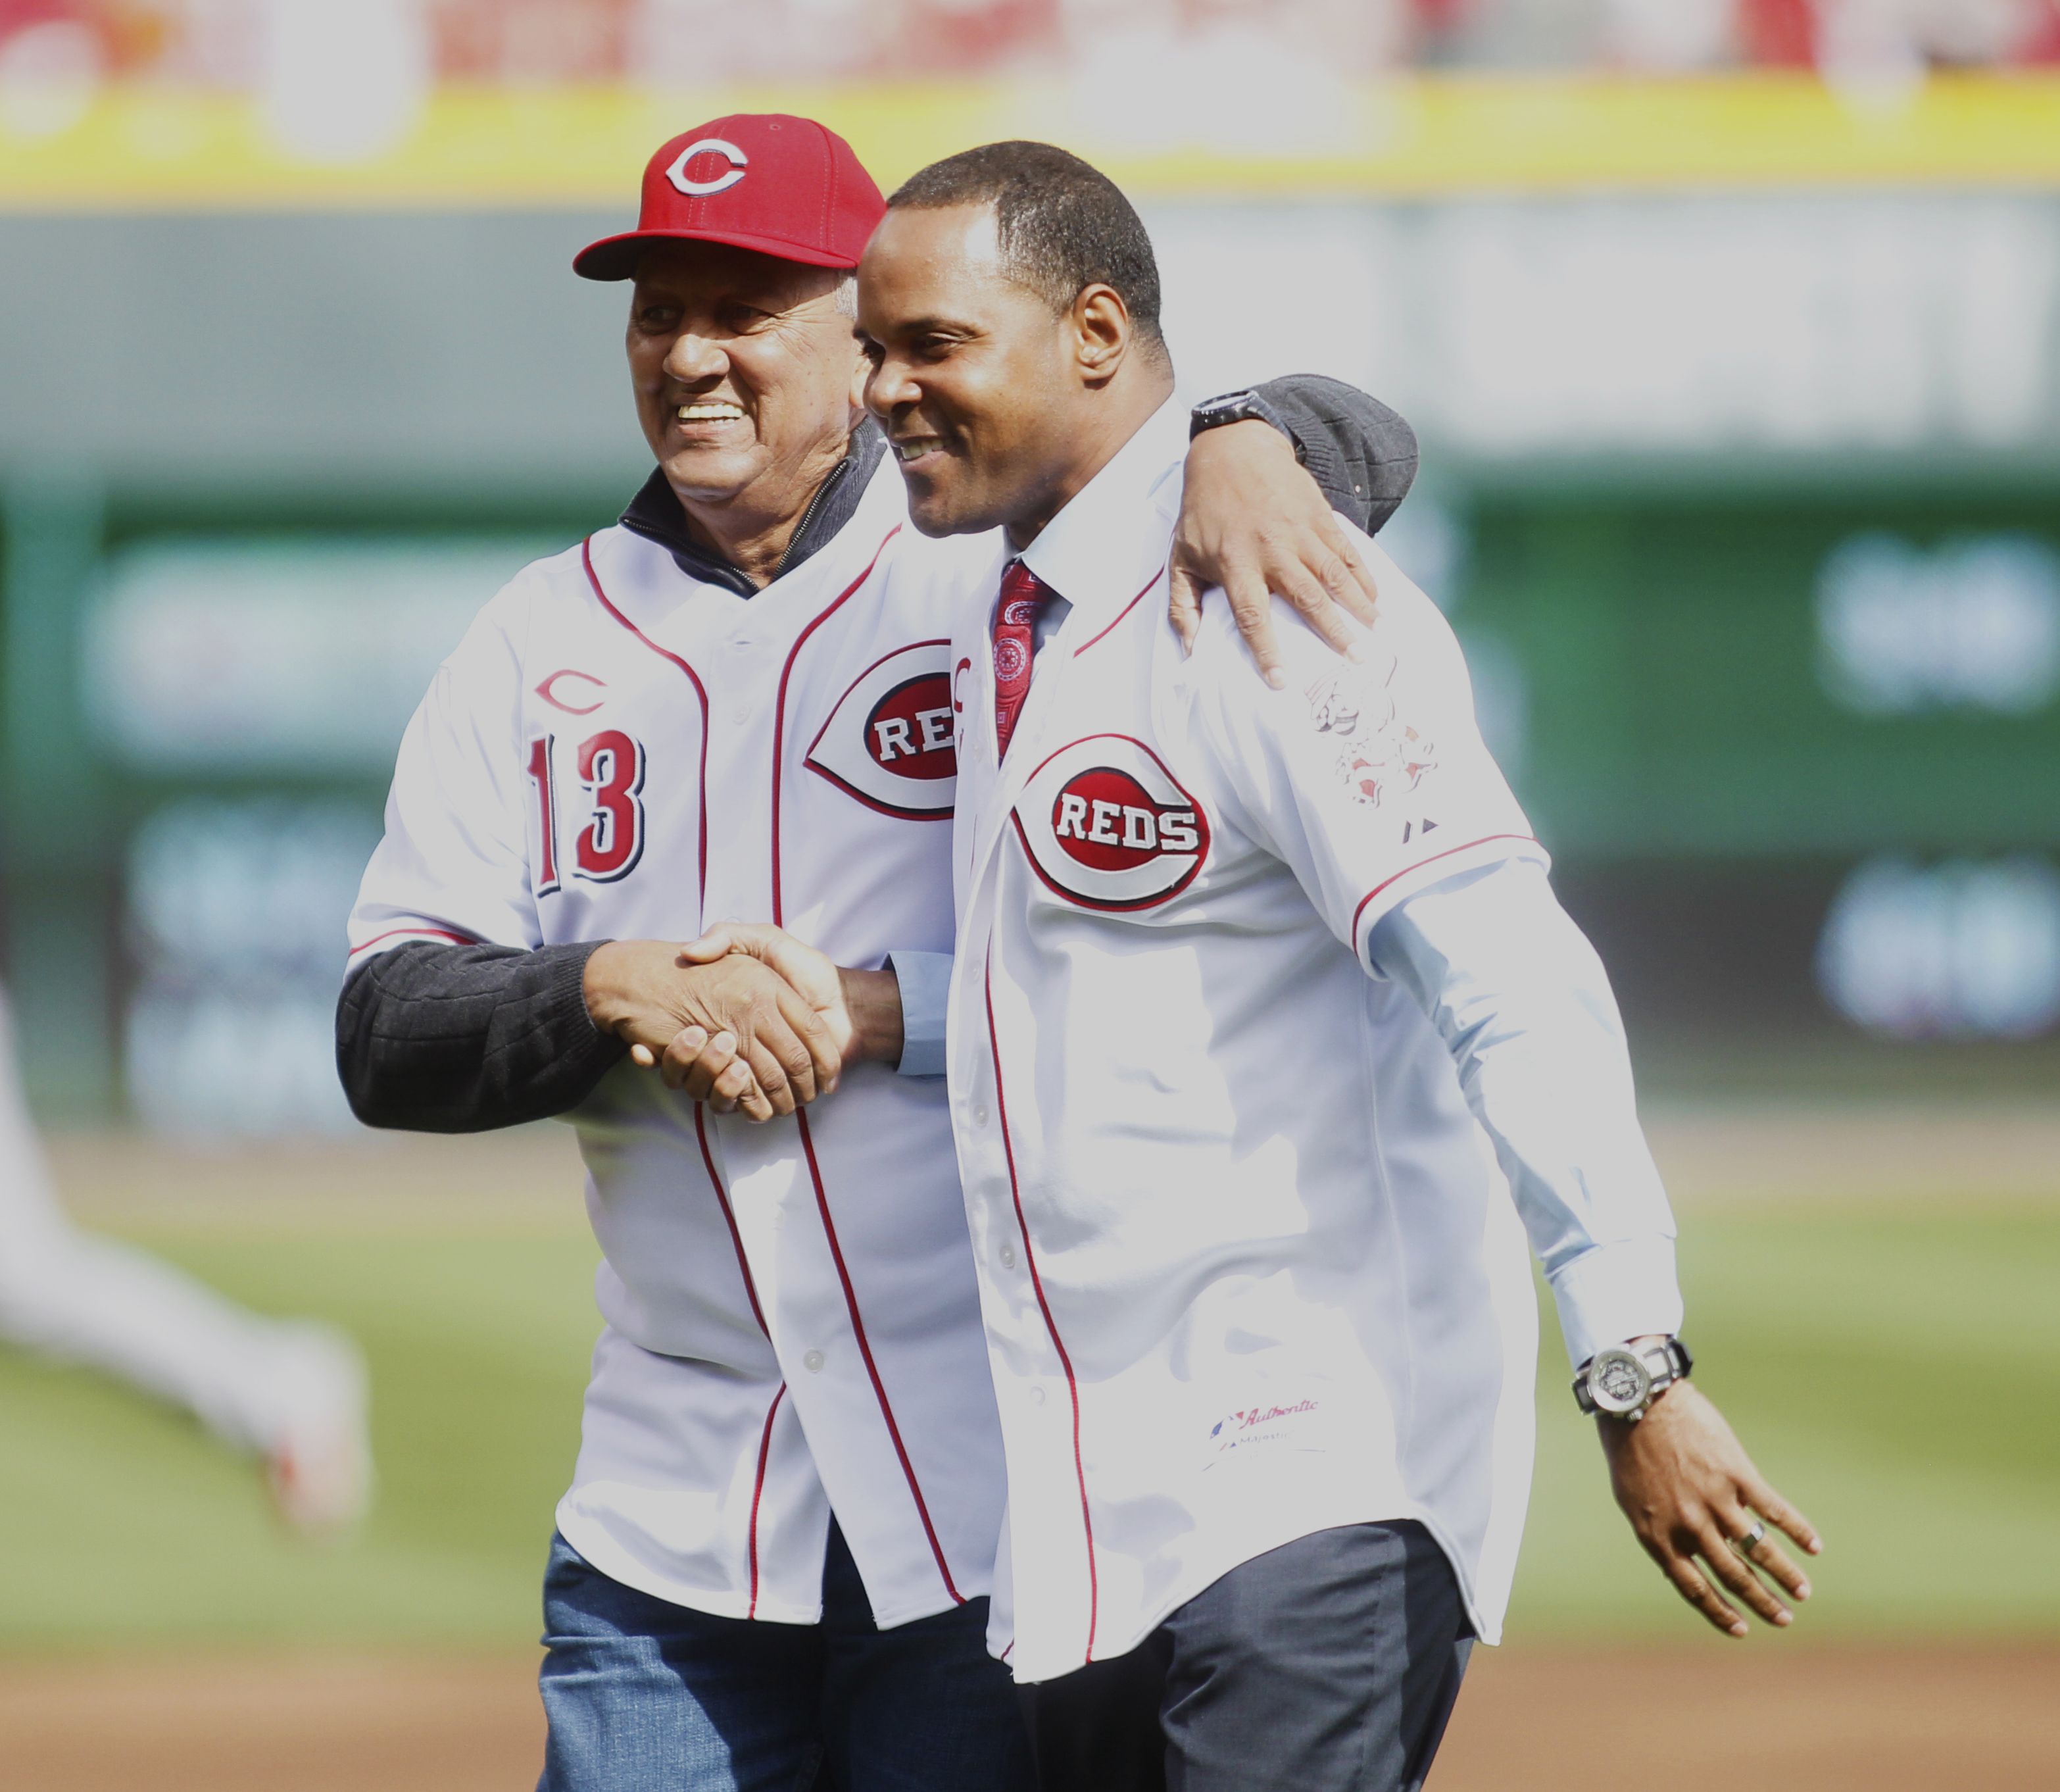 Ask Hal: Doubtful Larkin is ready to manage Reds